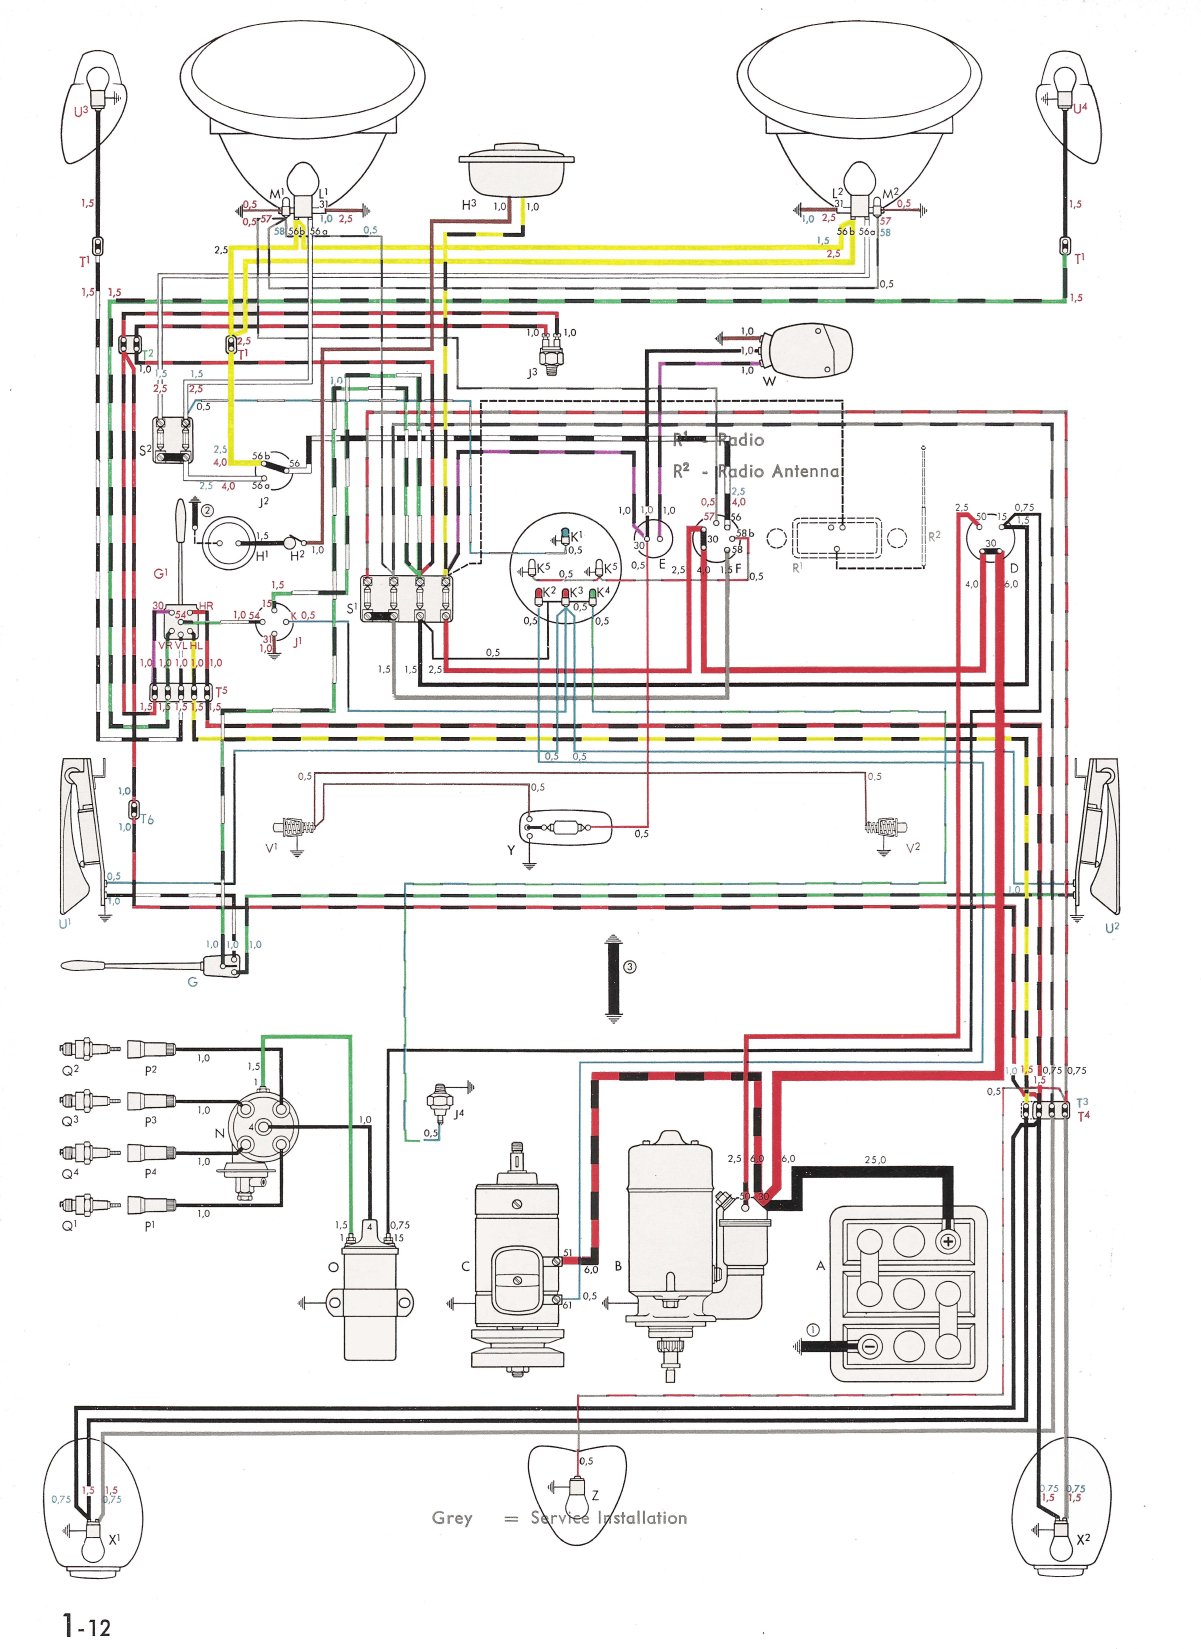 Electrics Oval ignition switch wiring diagram needed - VW Forum - VZi